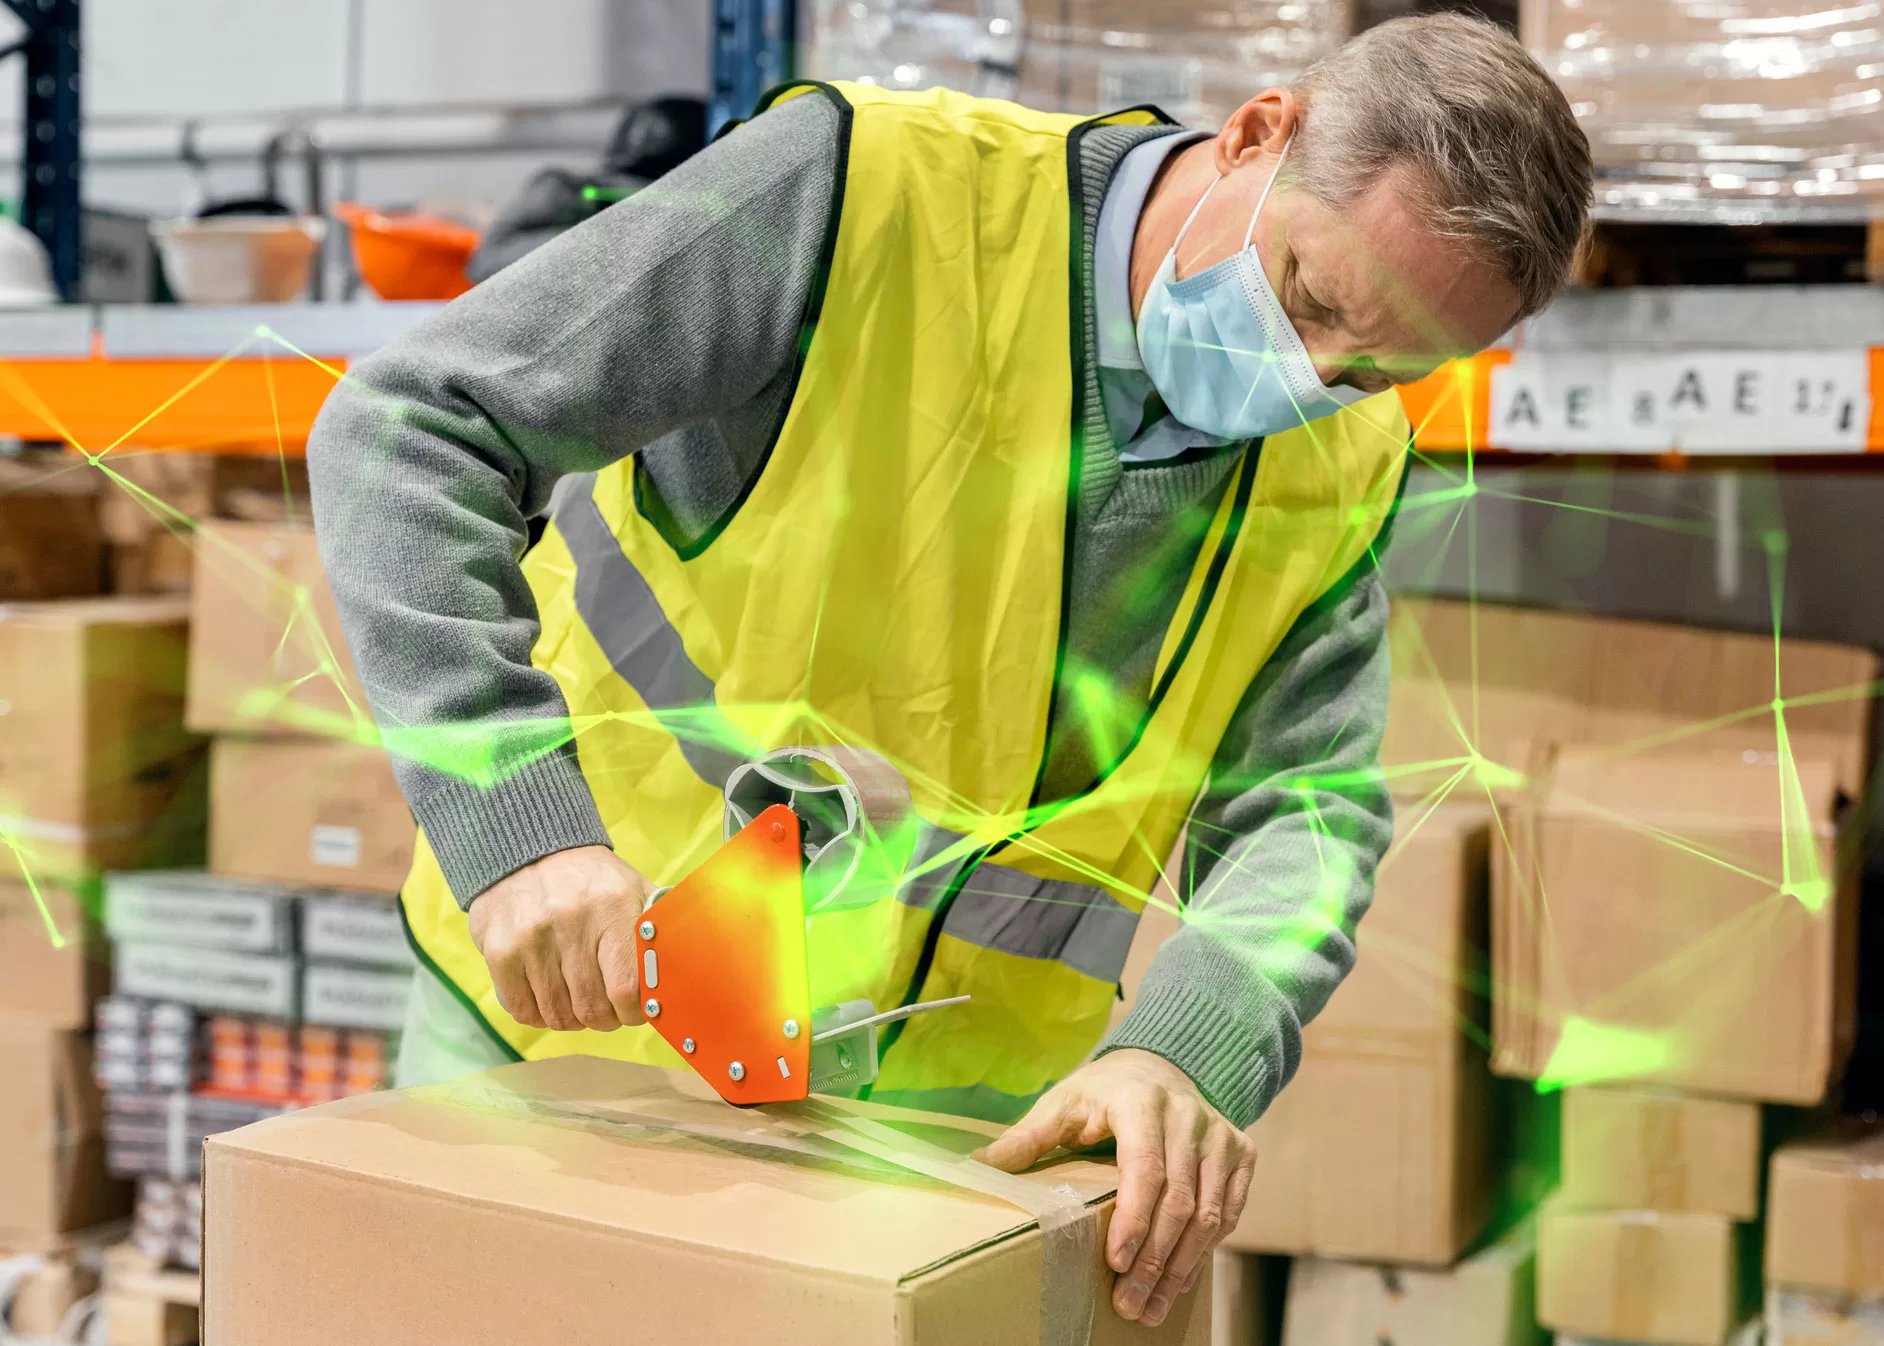 A man in a hi vis putting a package together in a warehouse plexus overlayed